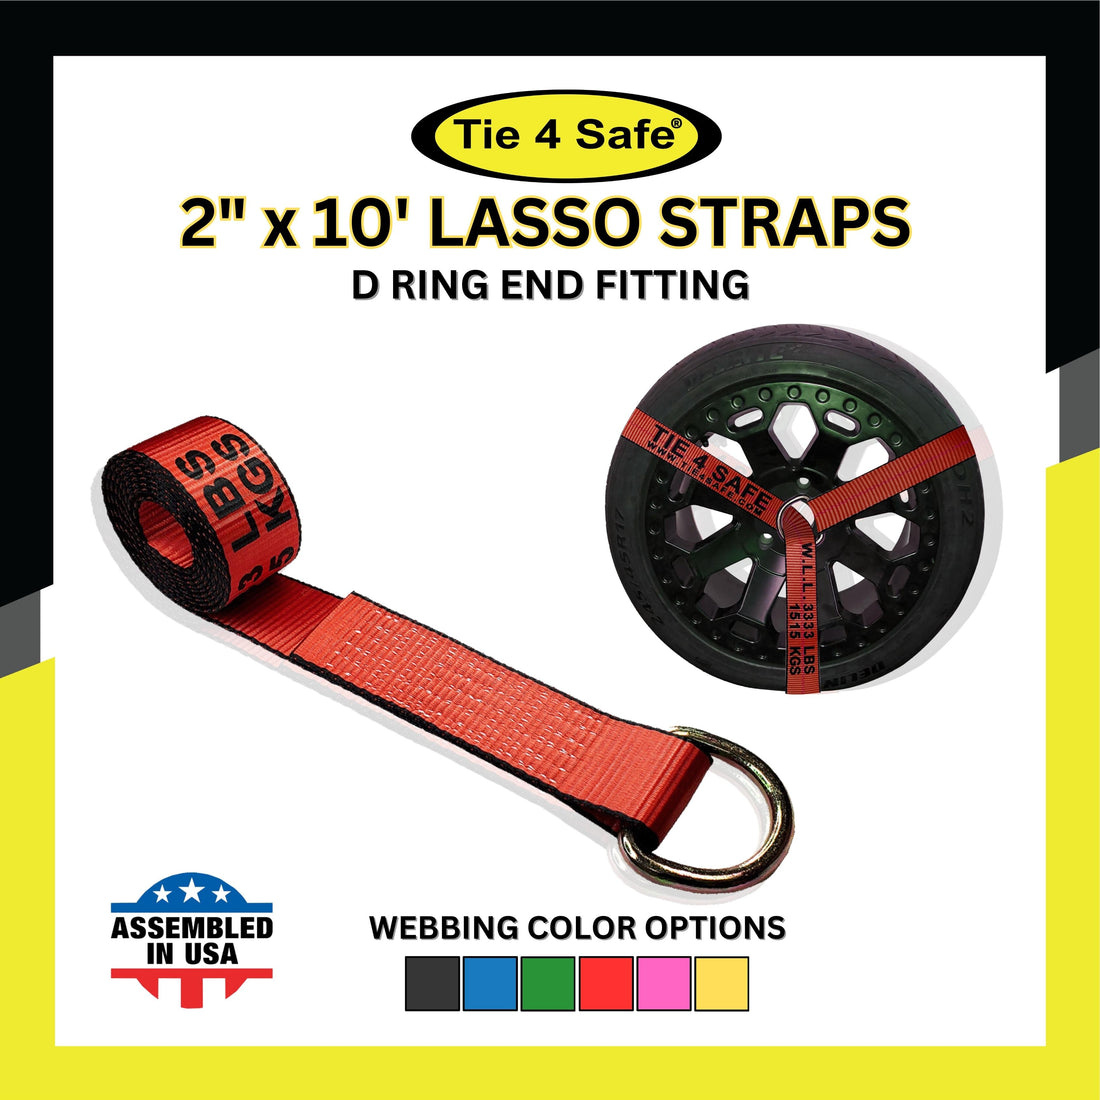 2" x 10' Lasso Strap With D-Ring